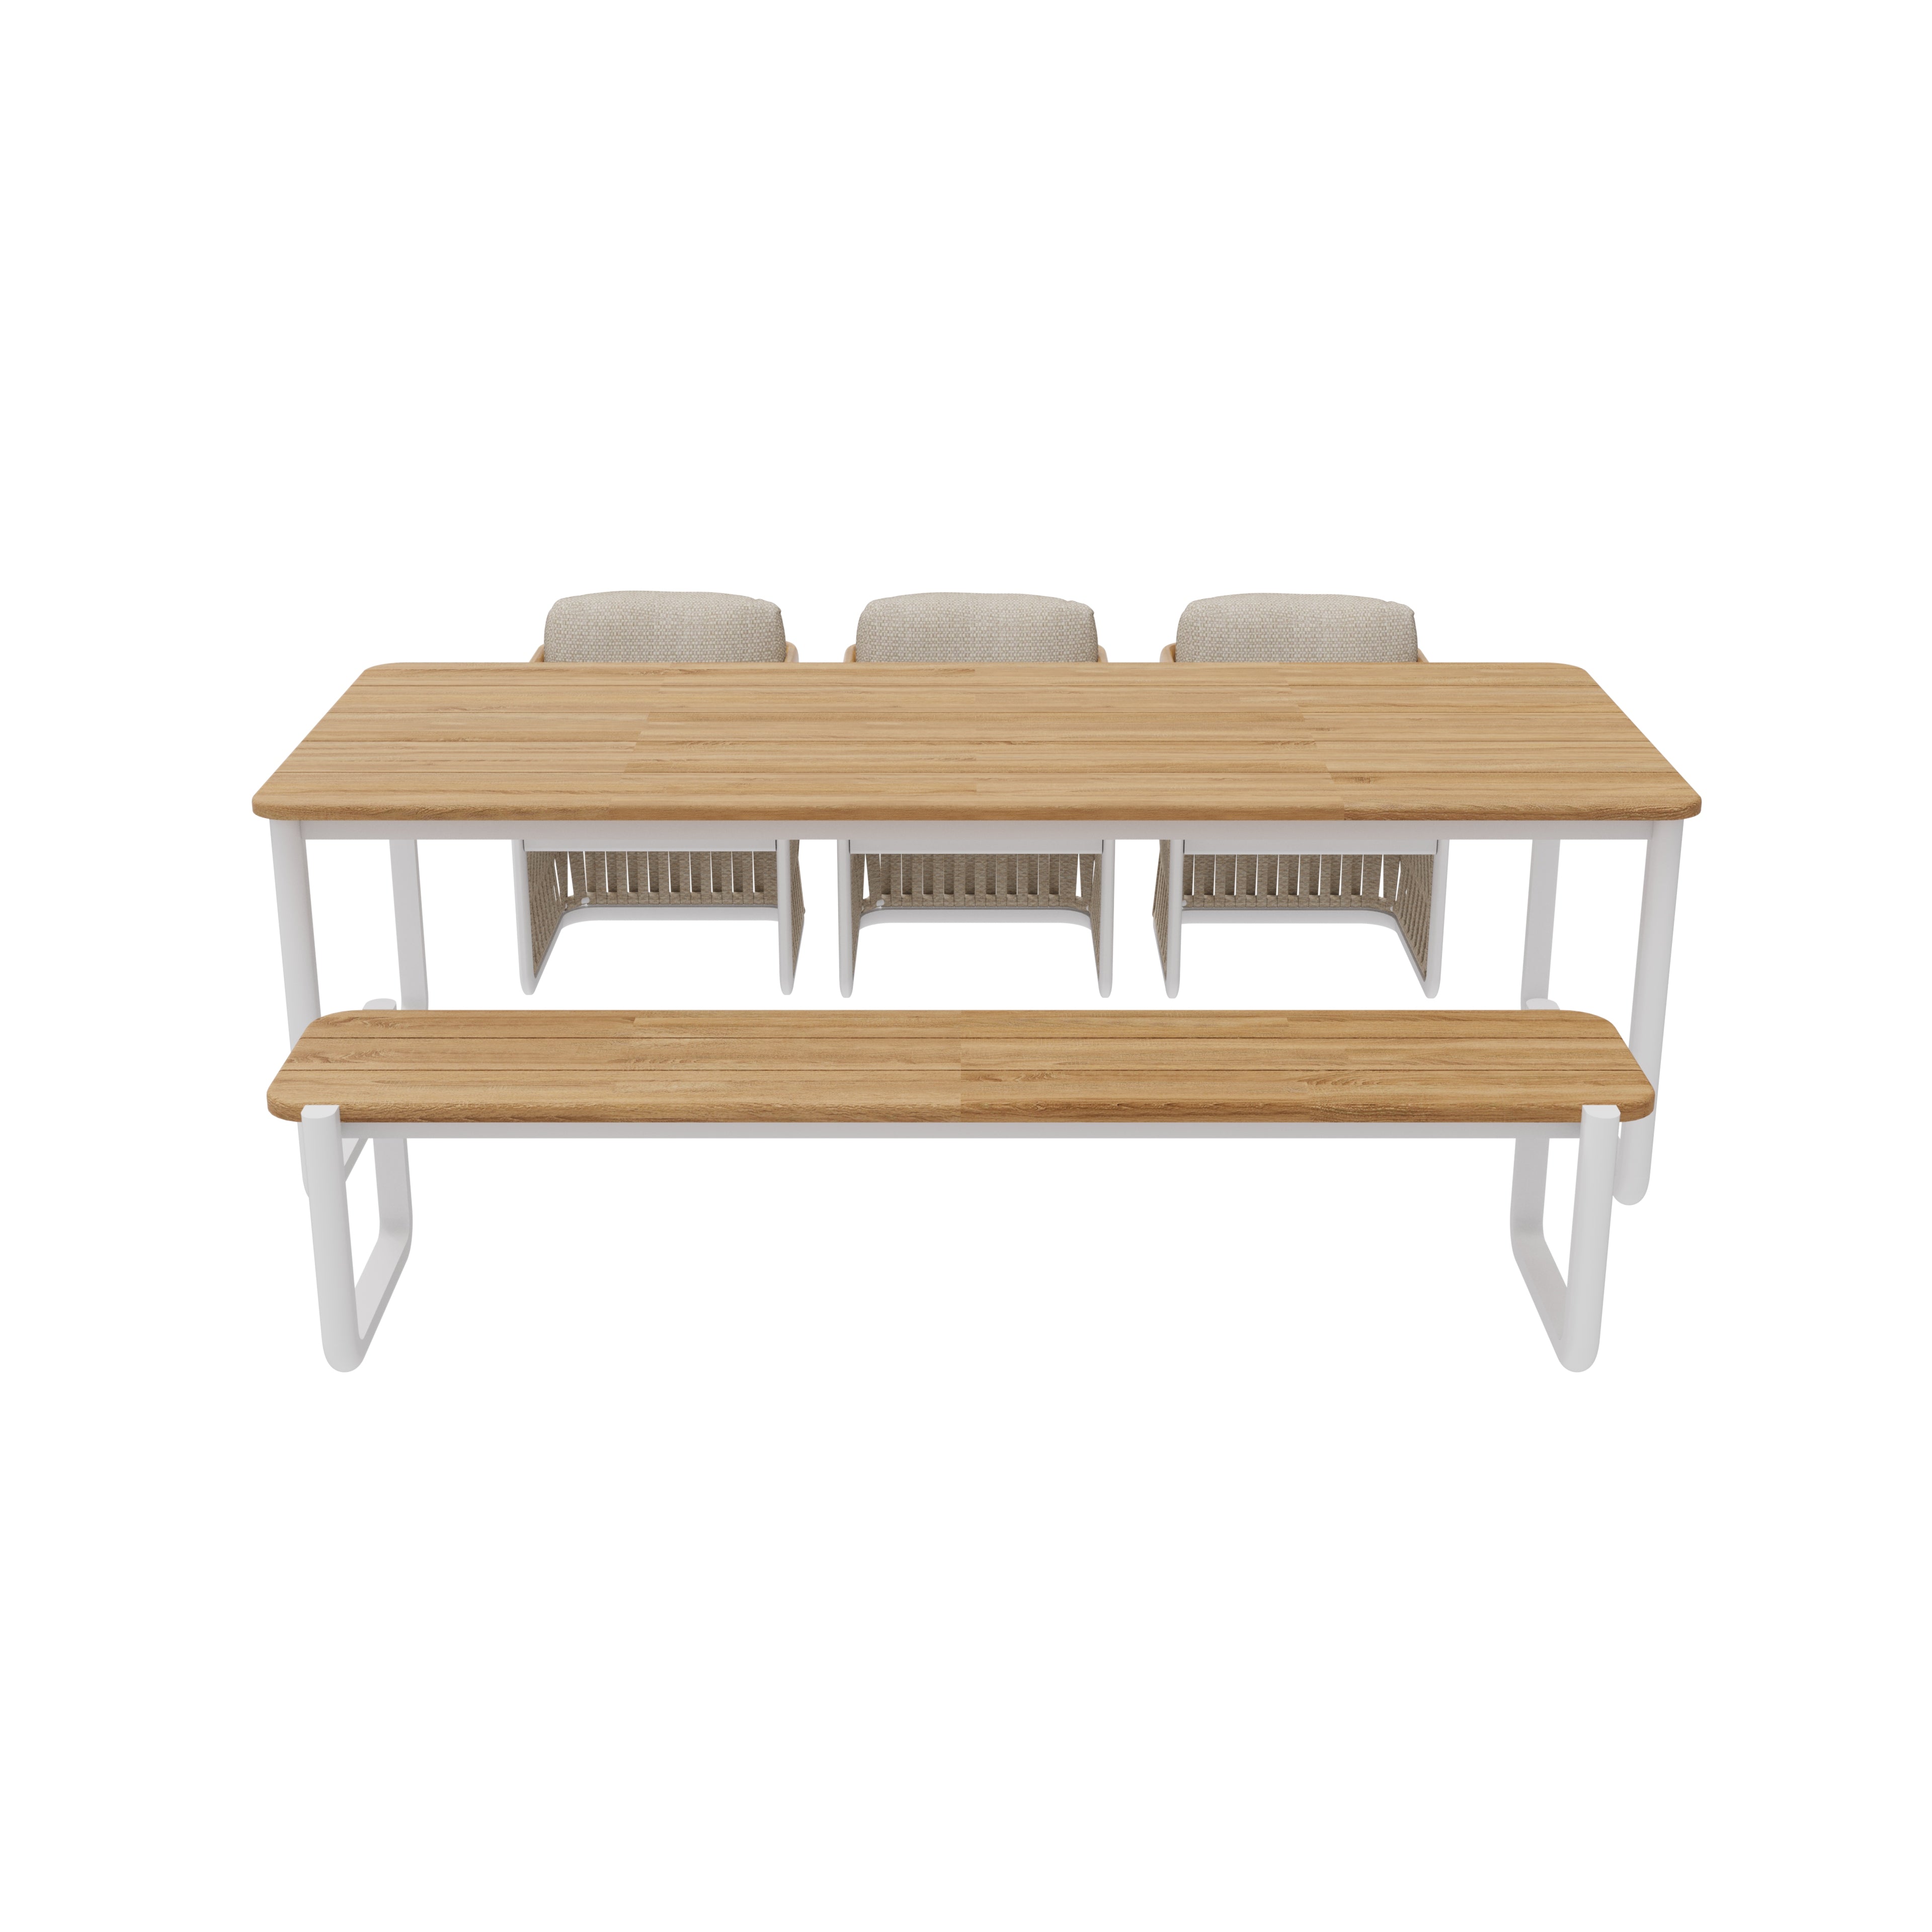 ARCHY DINING SET - RECT TABLE